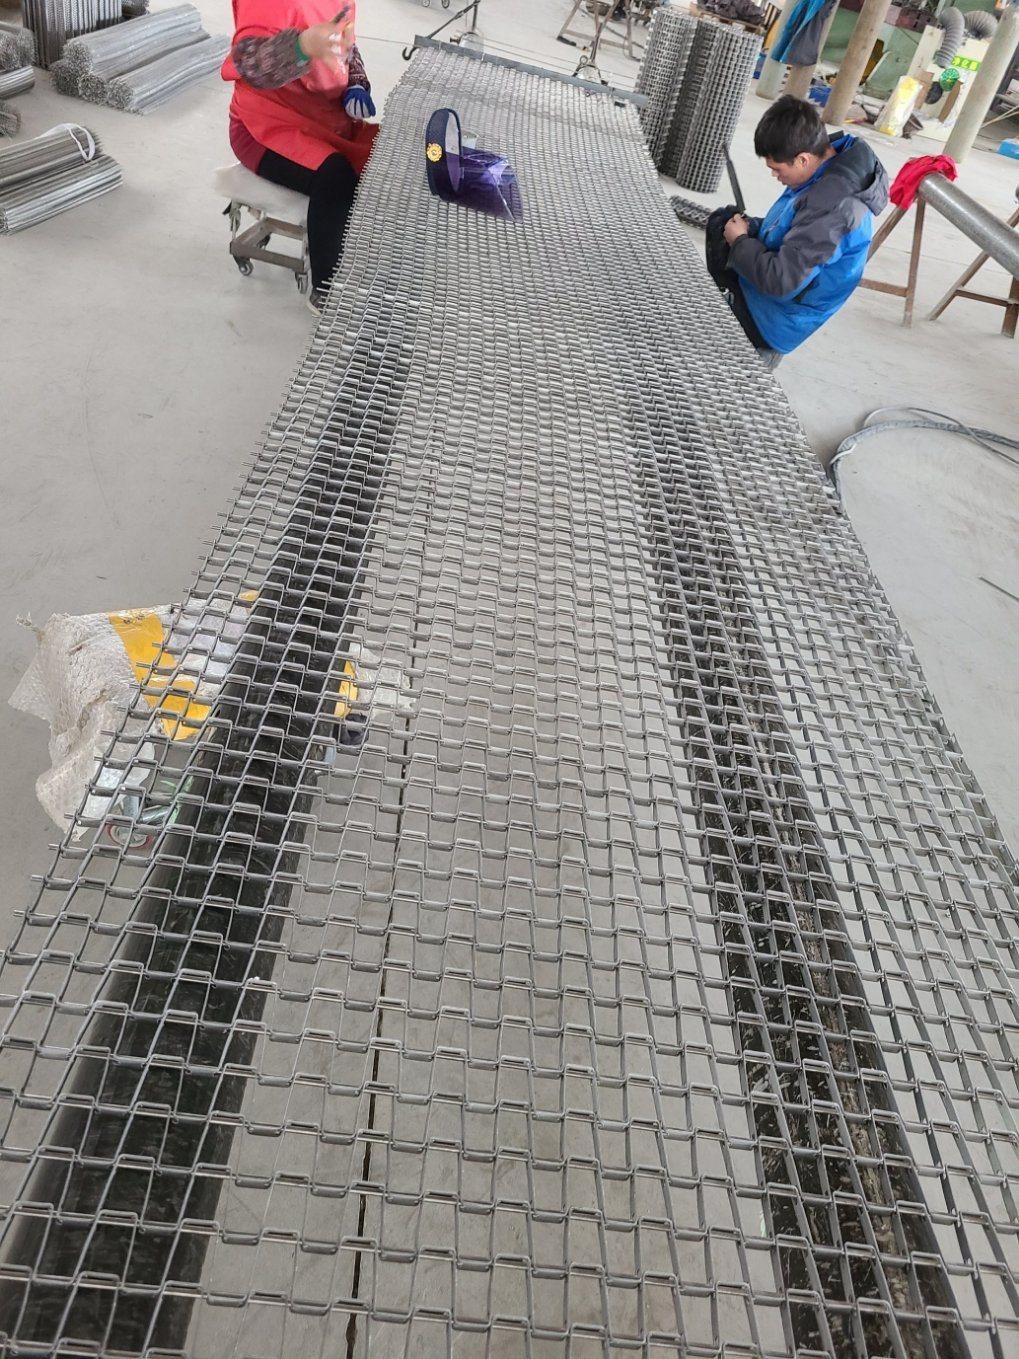 Can Be Customized Wholesale Silvery White Flat Wire Mesh Belt for Conveyor